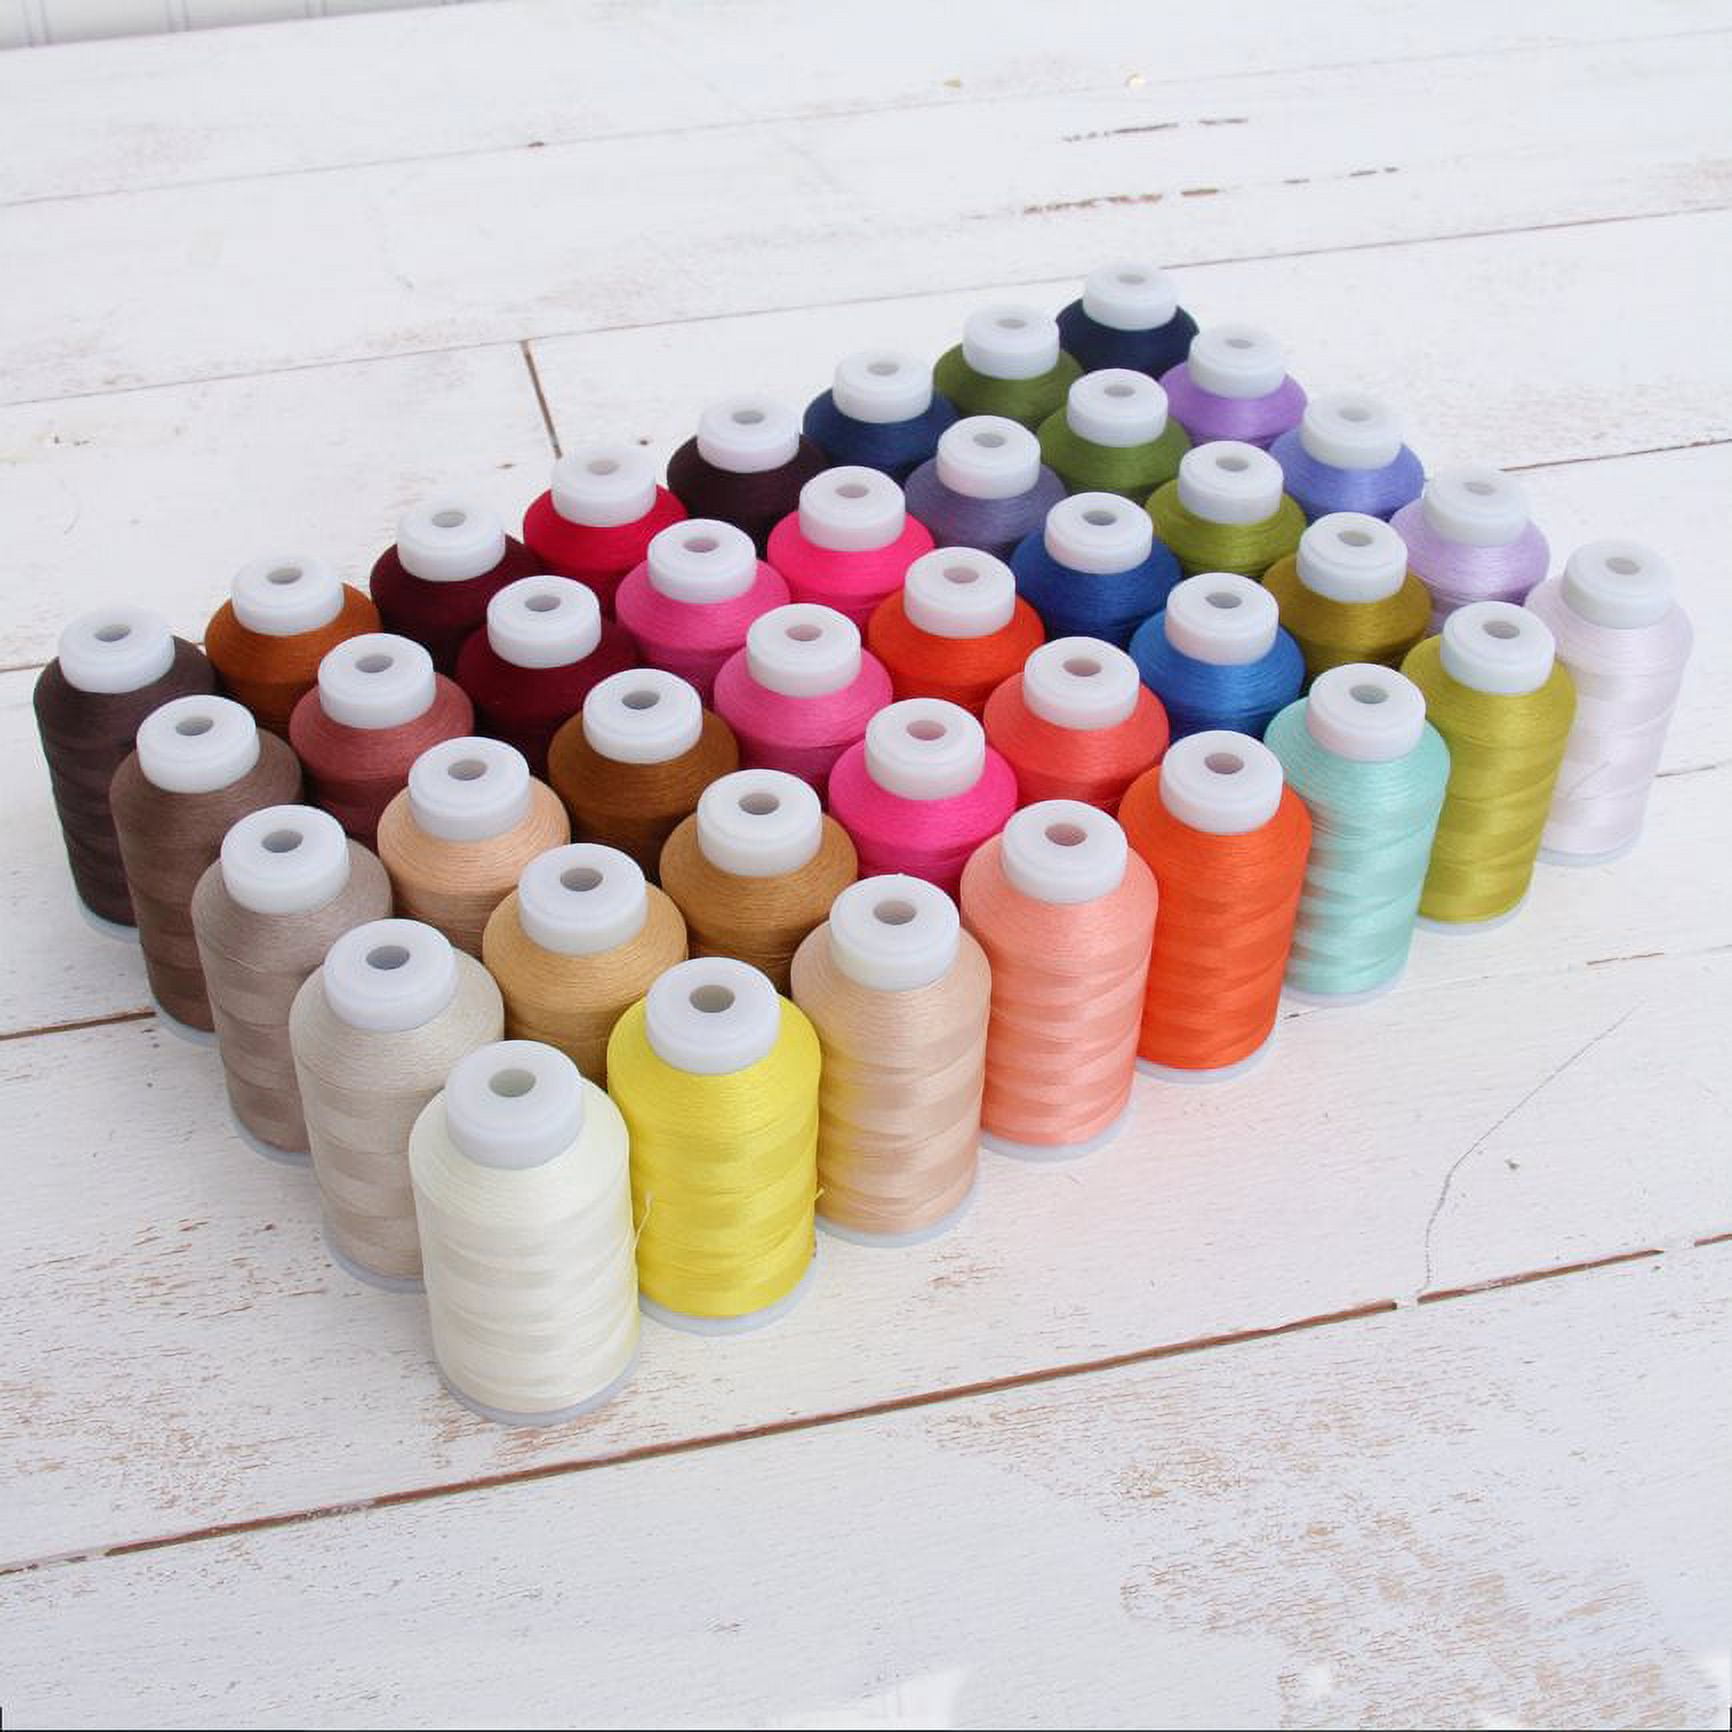 20 Piece Metallic Glitter Polyester Embroidery Thread Sewing Thread Set -  All Purpose Assorted Colours Crochet Thread 7YJ71 - AliExpress